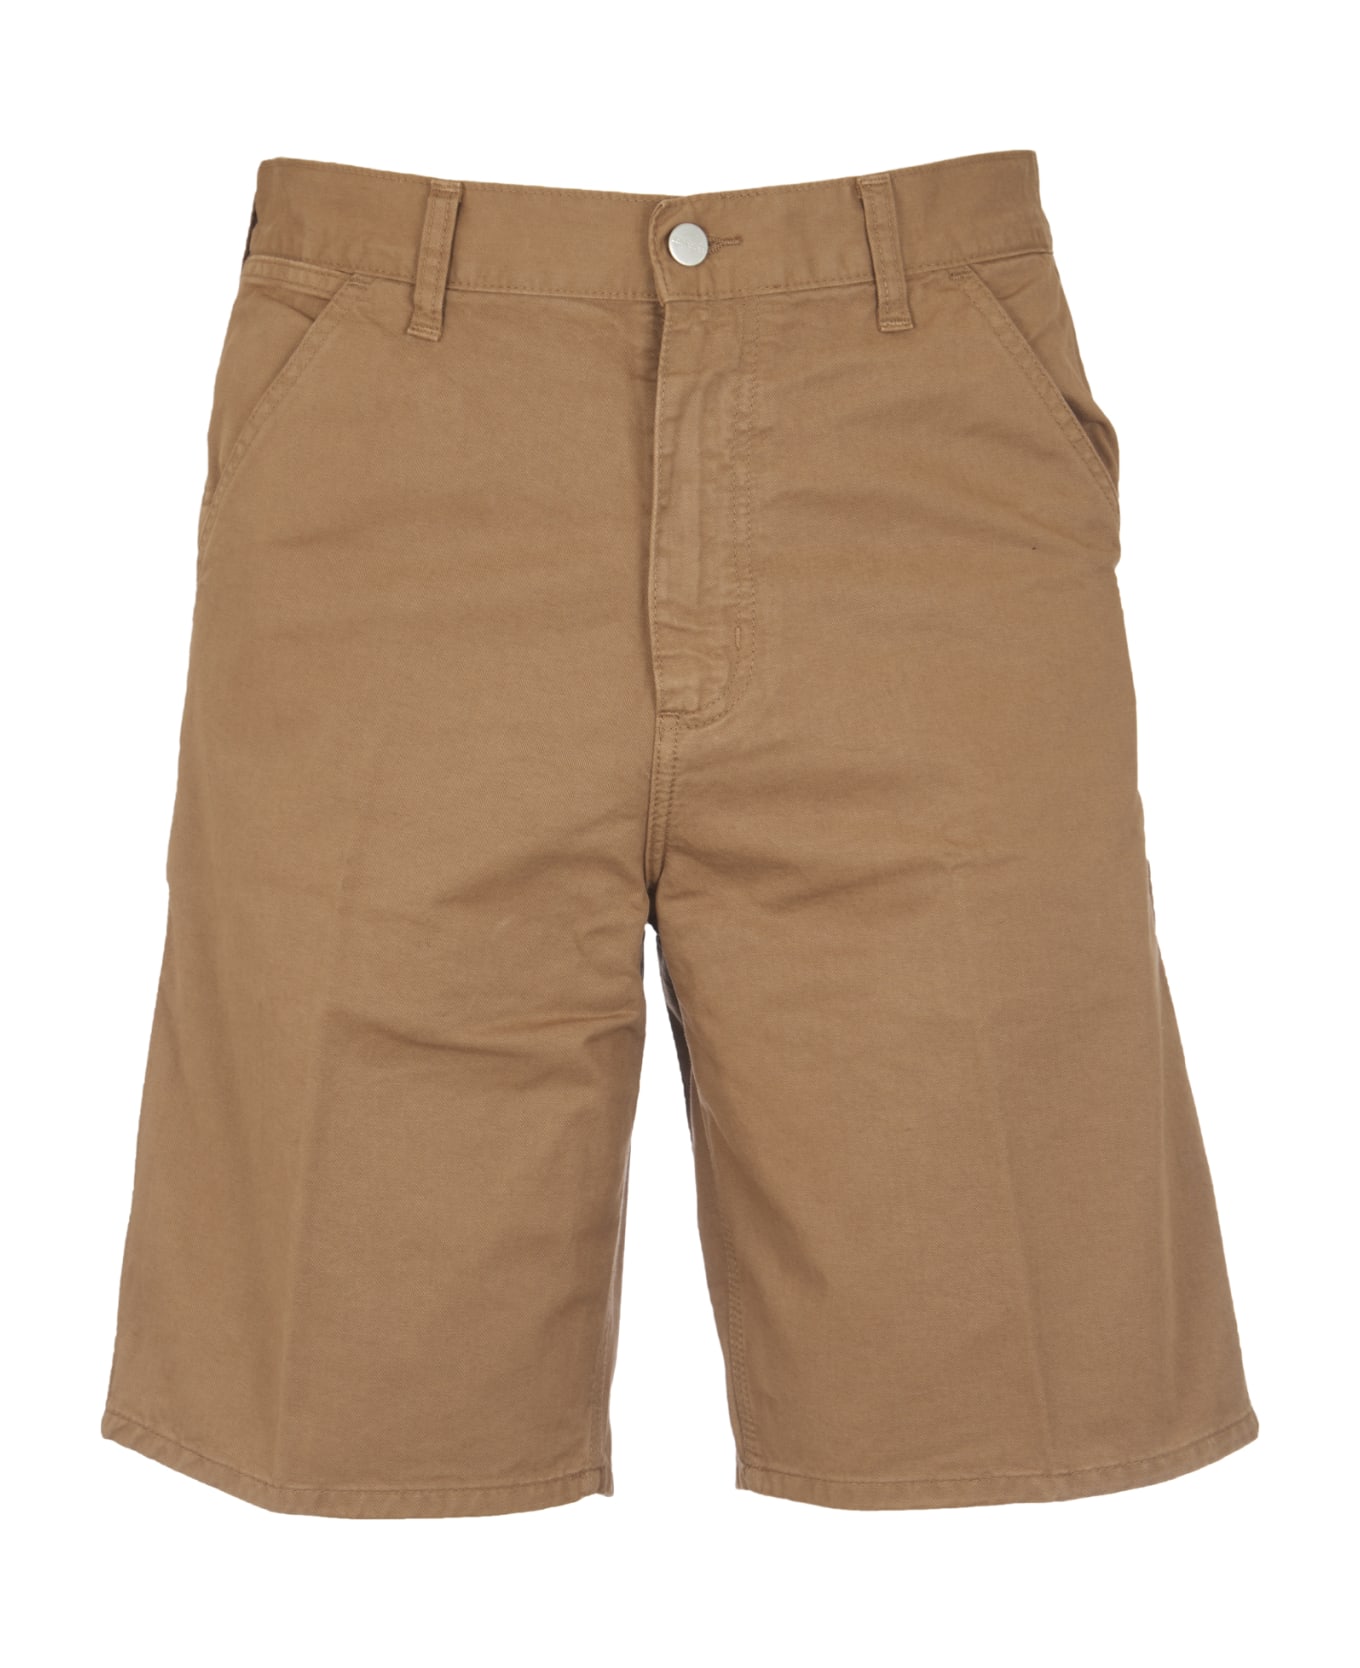 Carhartt Fitted Buttoned Shorts - Buffalo